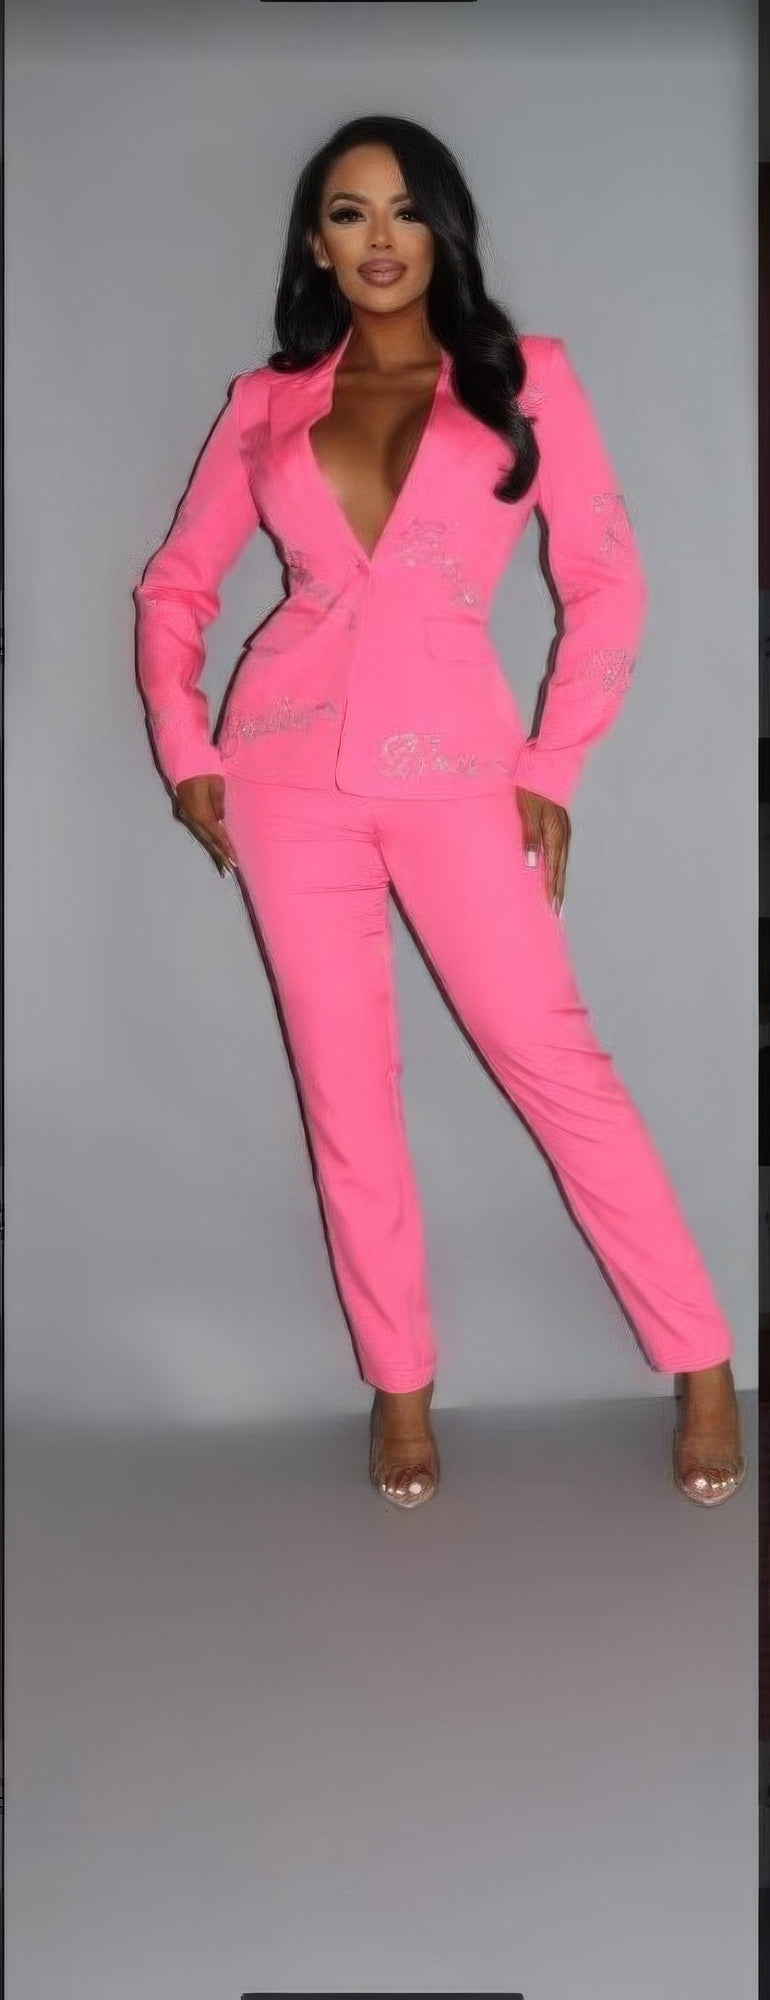 a person in a pink suit posing for a picture